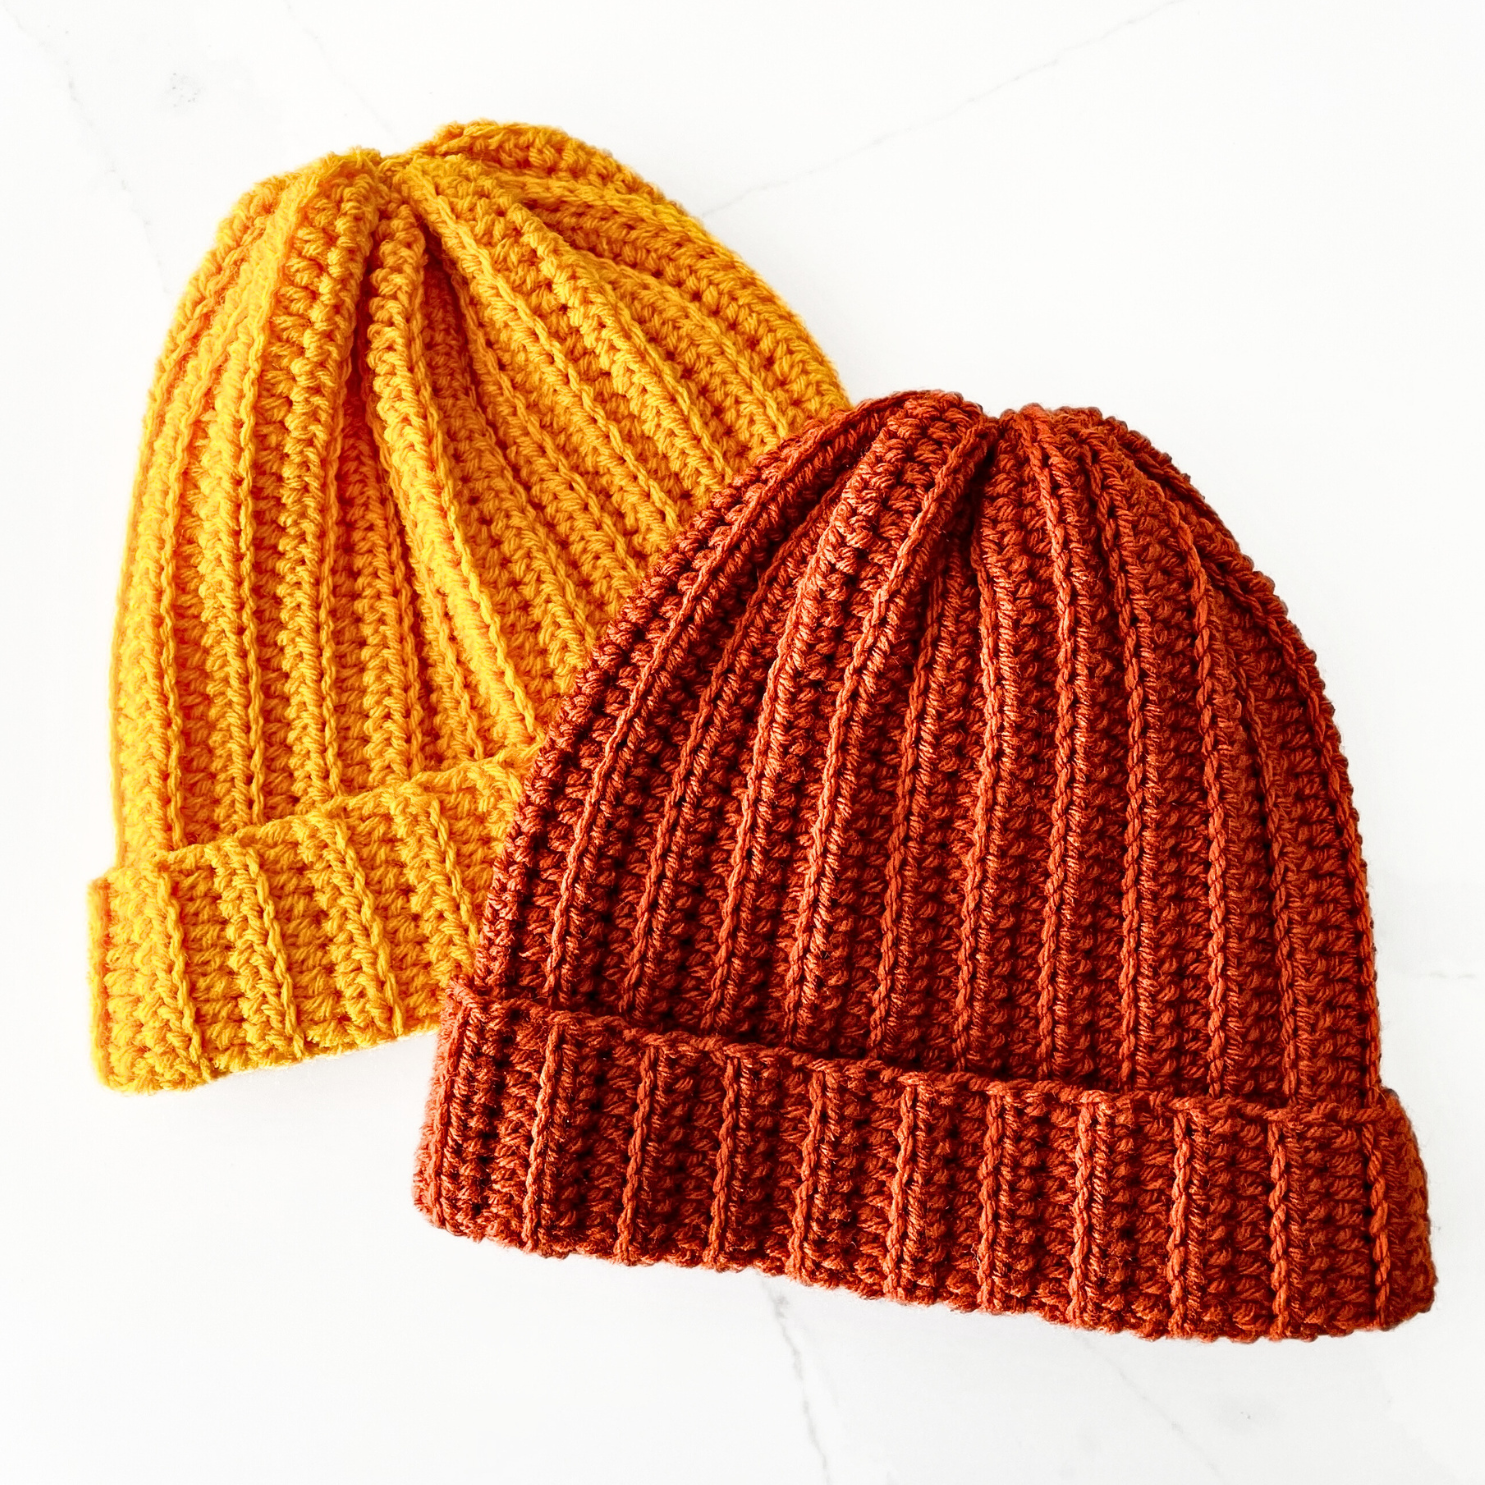 How to Crochet a Hat for Beginners – Free Ribbed Beanie Pattern